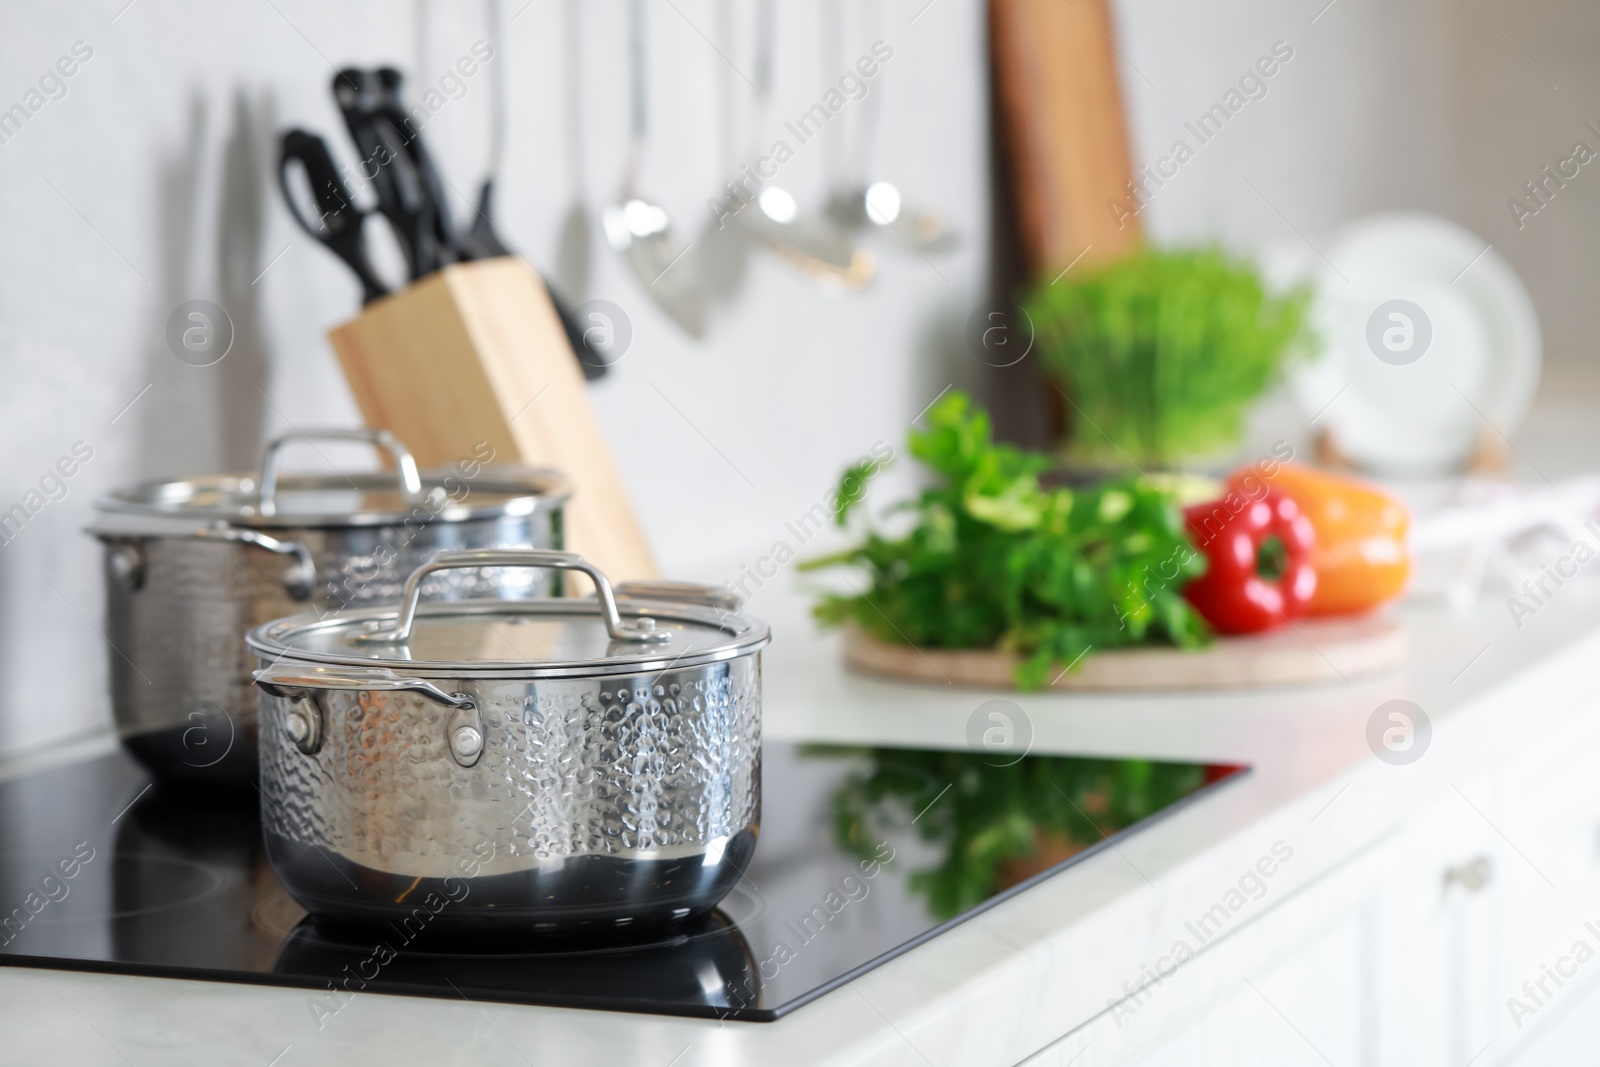 Photo of Pots with lids on cooktop in kitchen, space for text. Cooking utensils